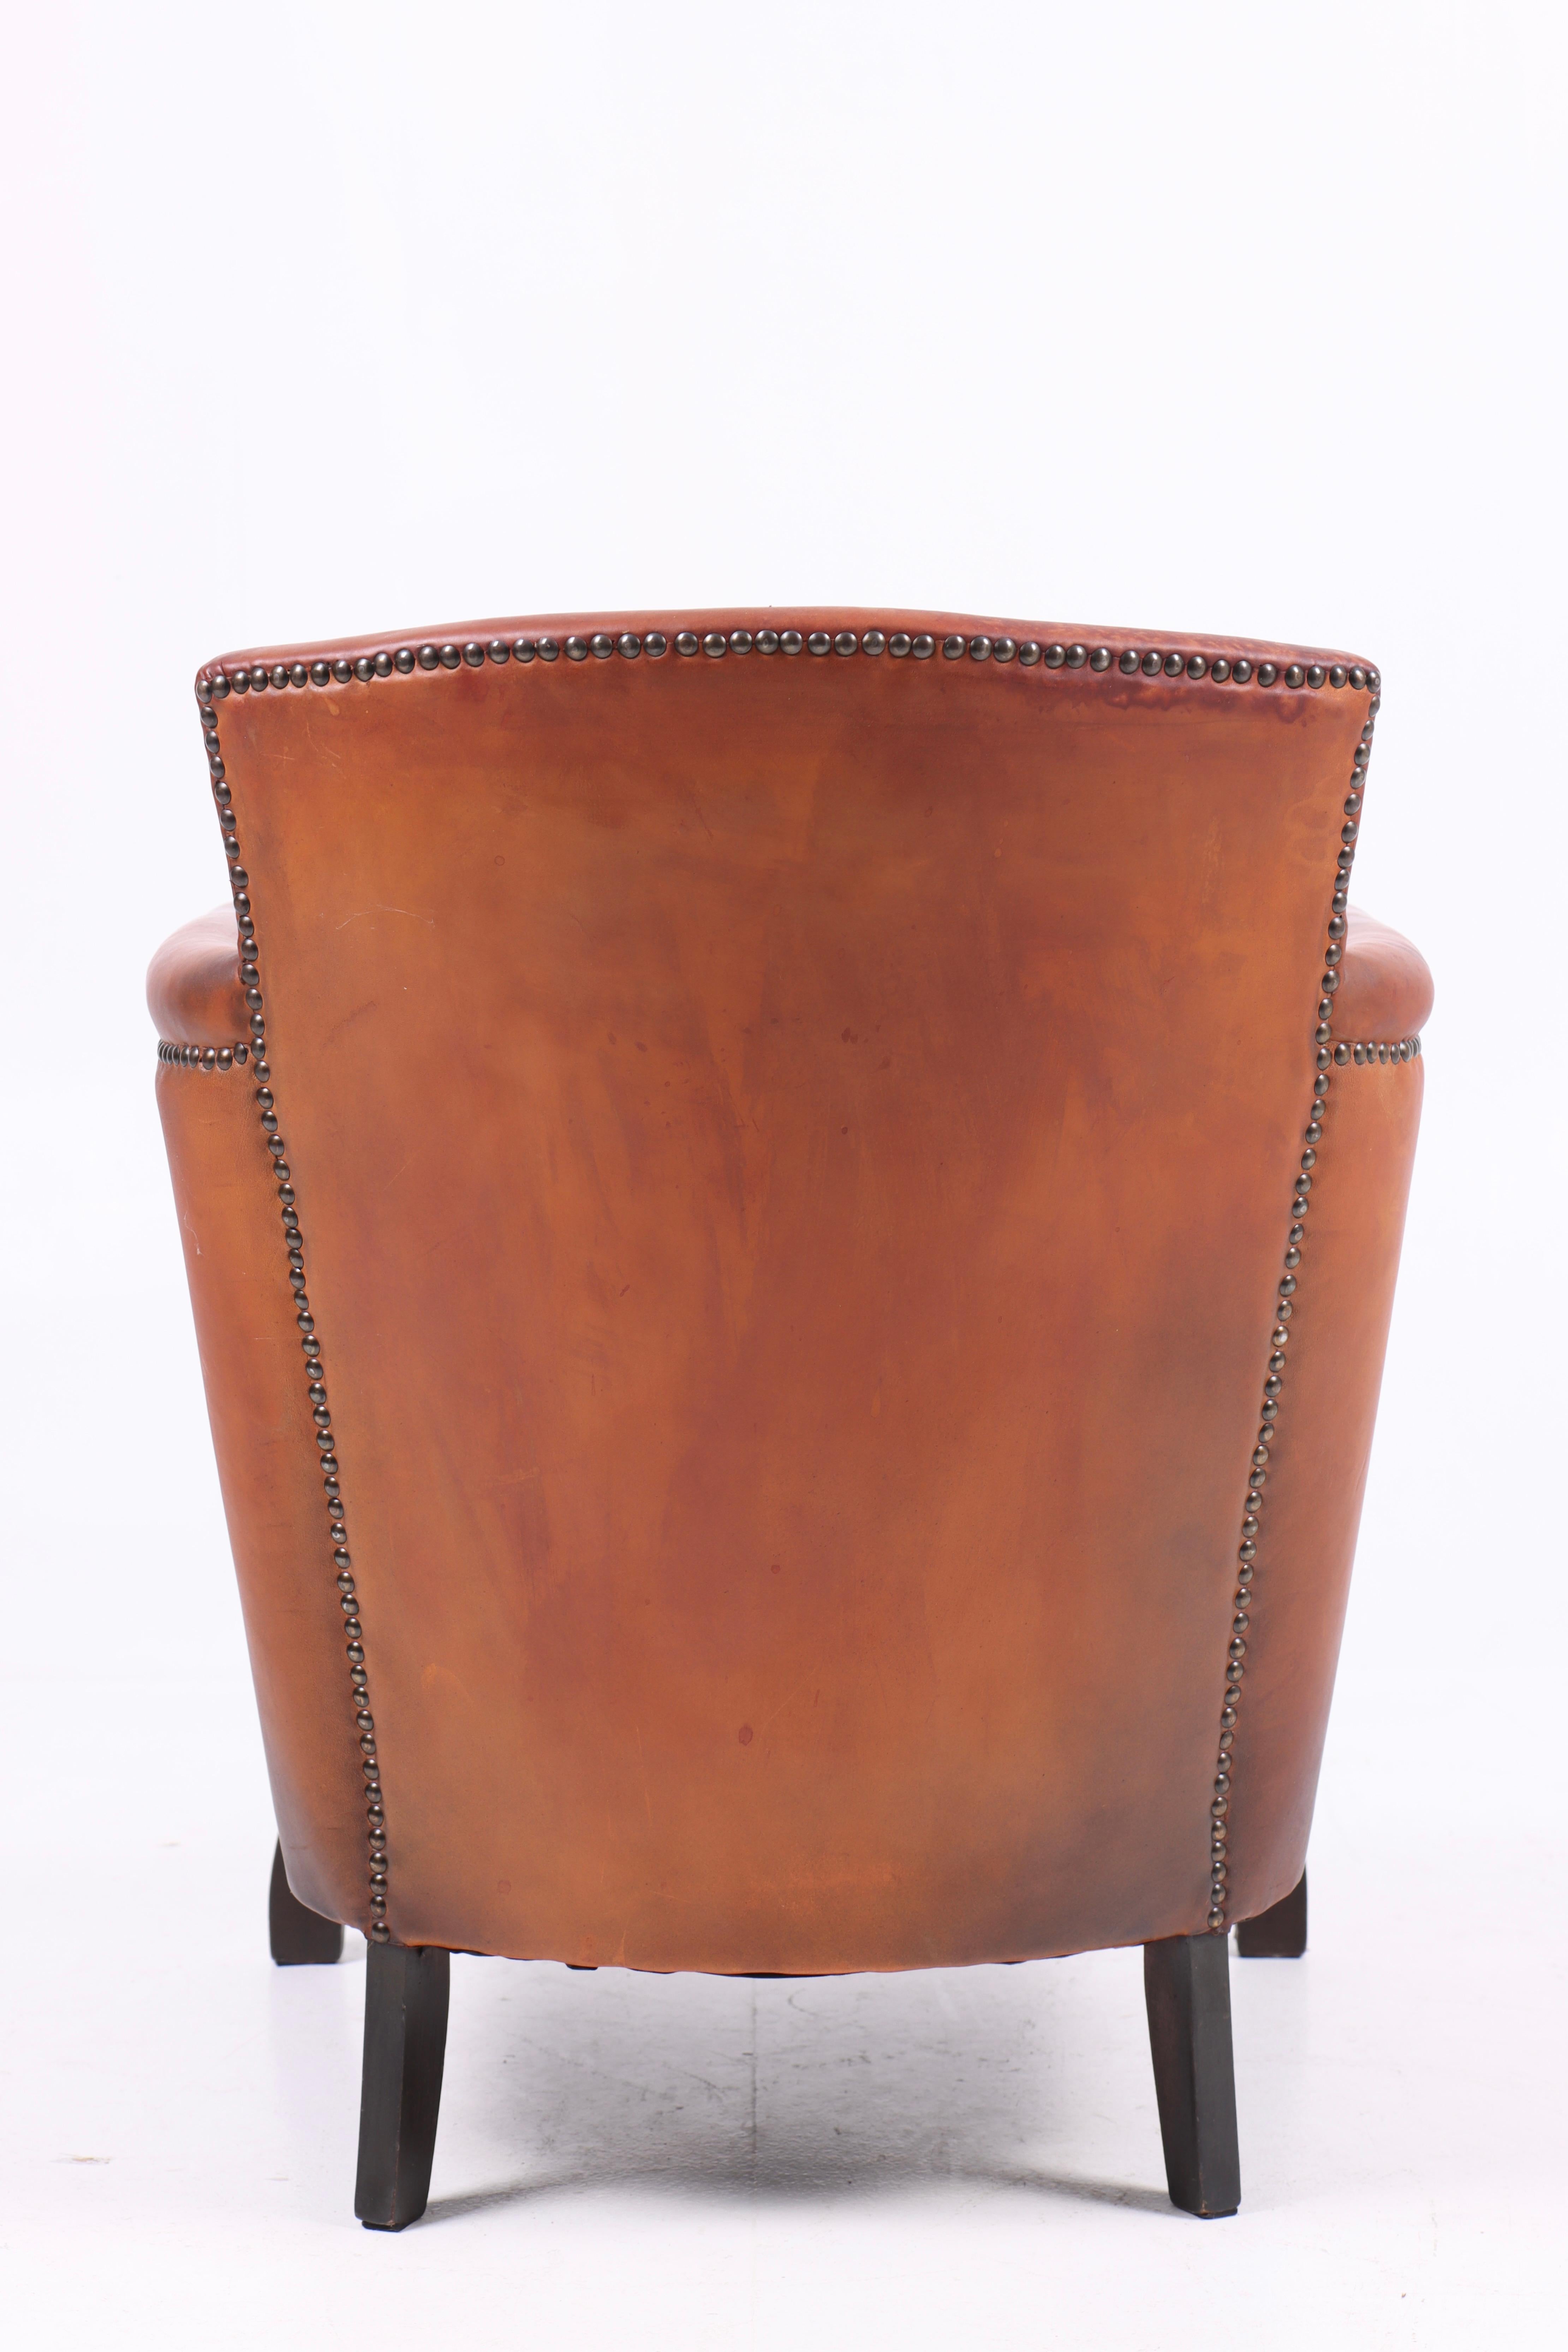 Mid-20th Century Lounge Chair in Patinated Leather, Designed by Otto Schulz